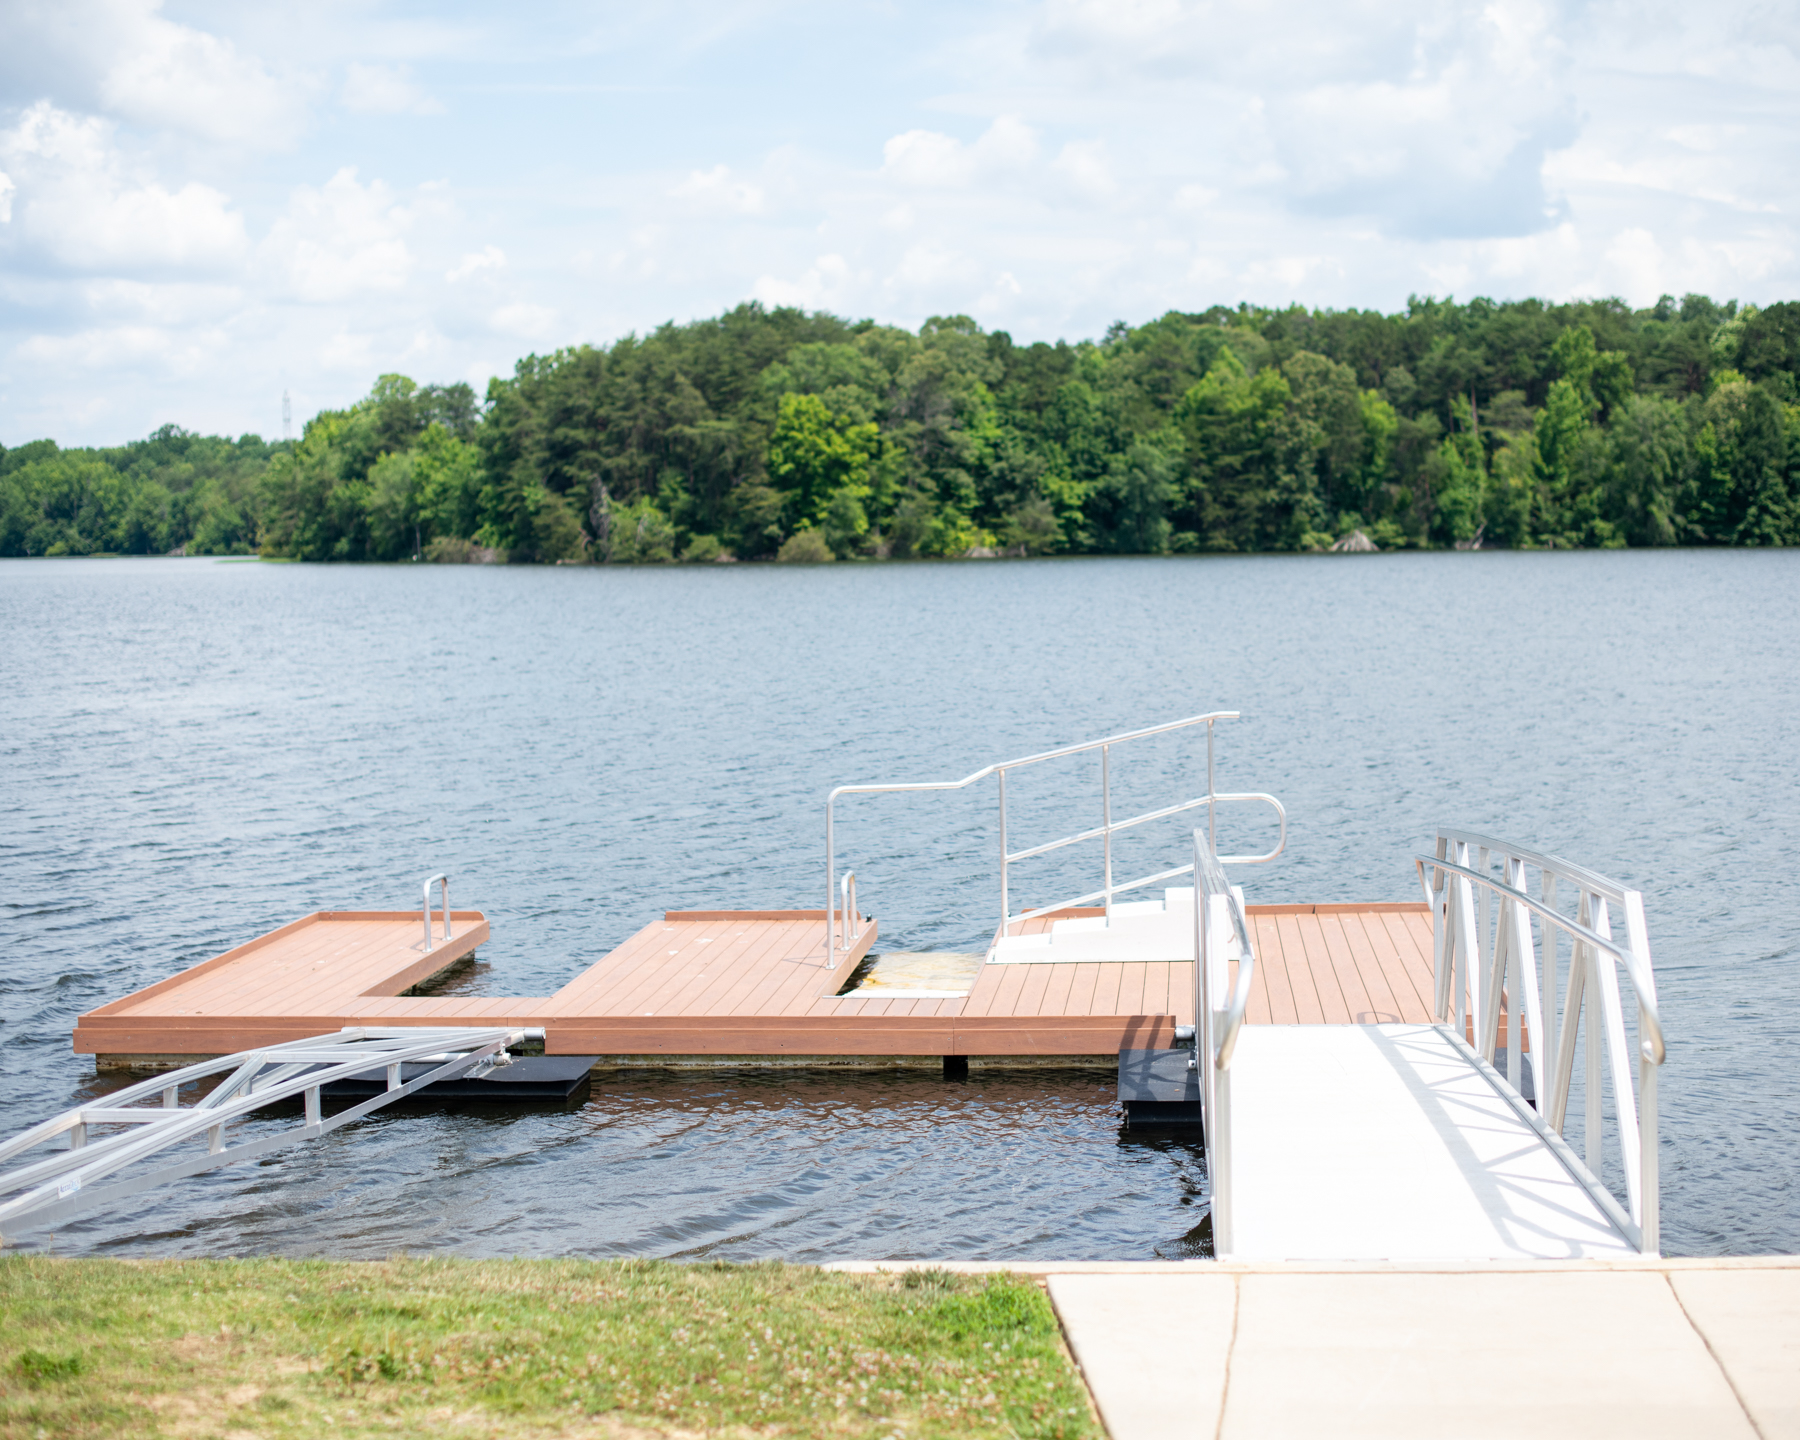 The Oak Hollow Lake Marina has a dock and boat launch in High Point, NC.